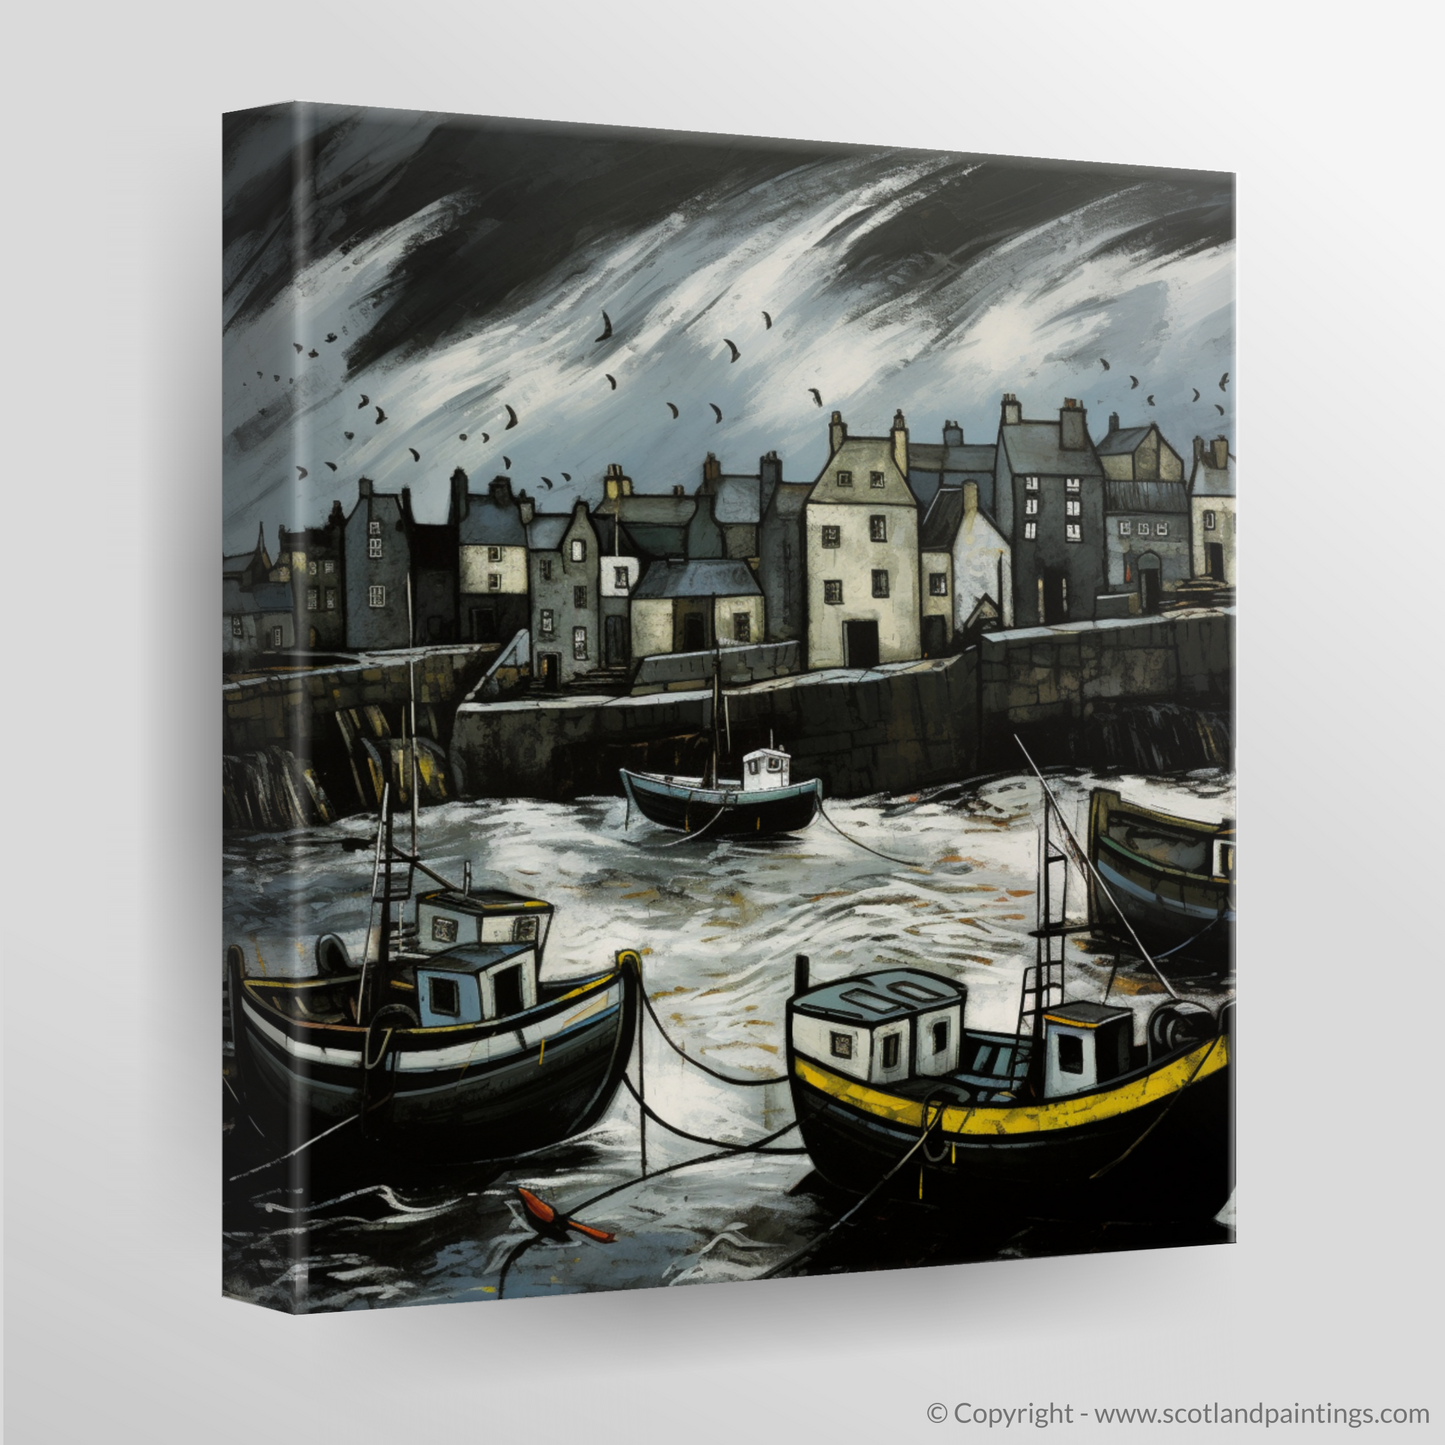 Painting and Art Print of Portsoy Harbour with a stormy sky. Stormy Serenade at Portsoy Harbour.